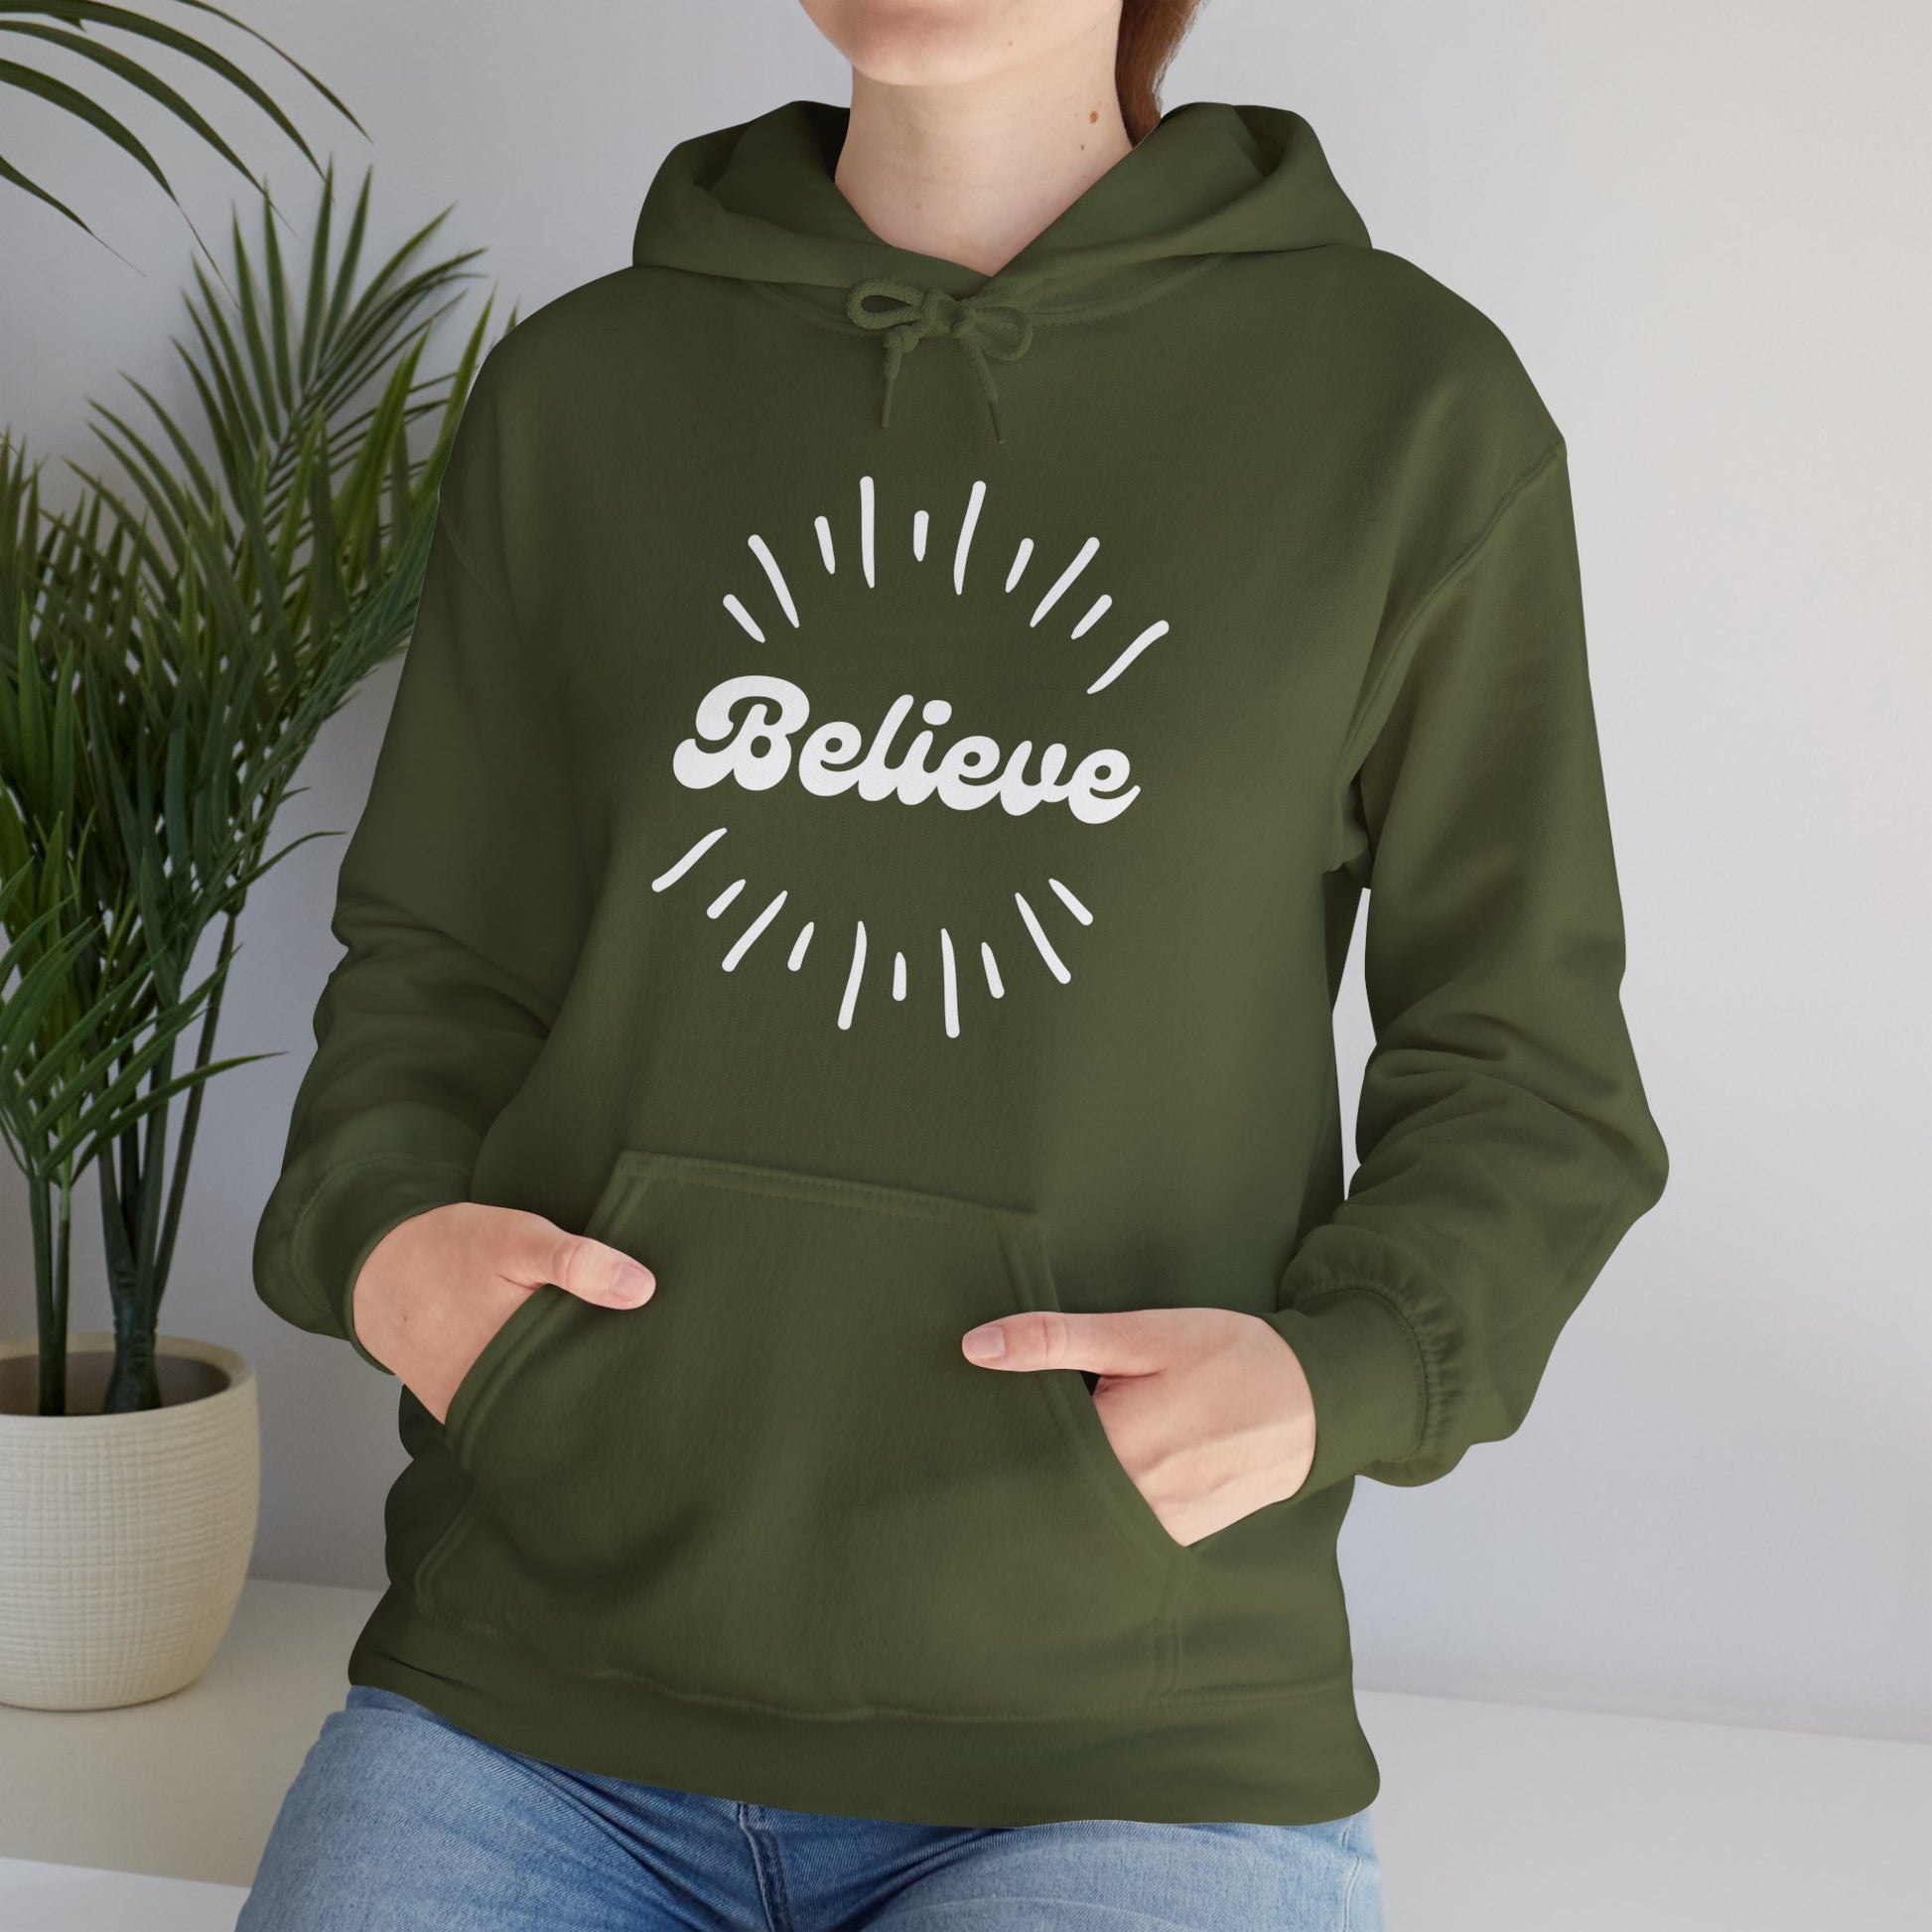 Believe Hoodie - Friends of the Faith